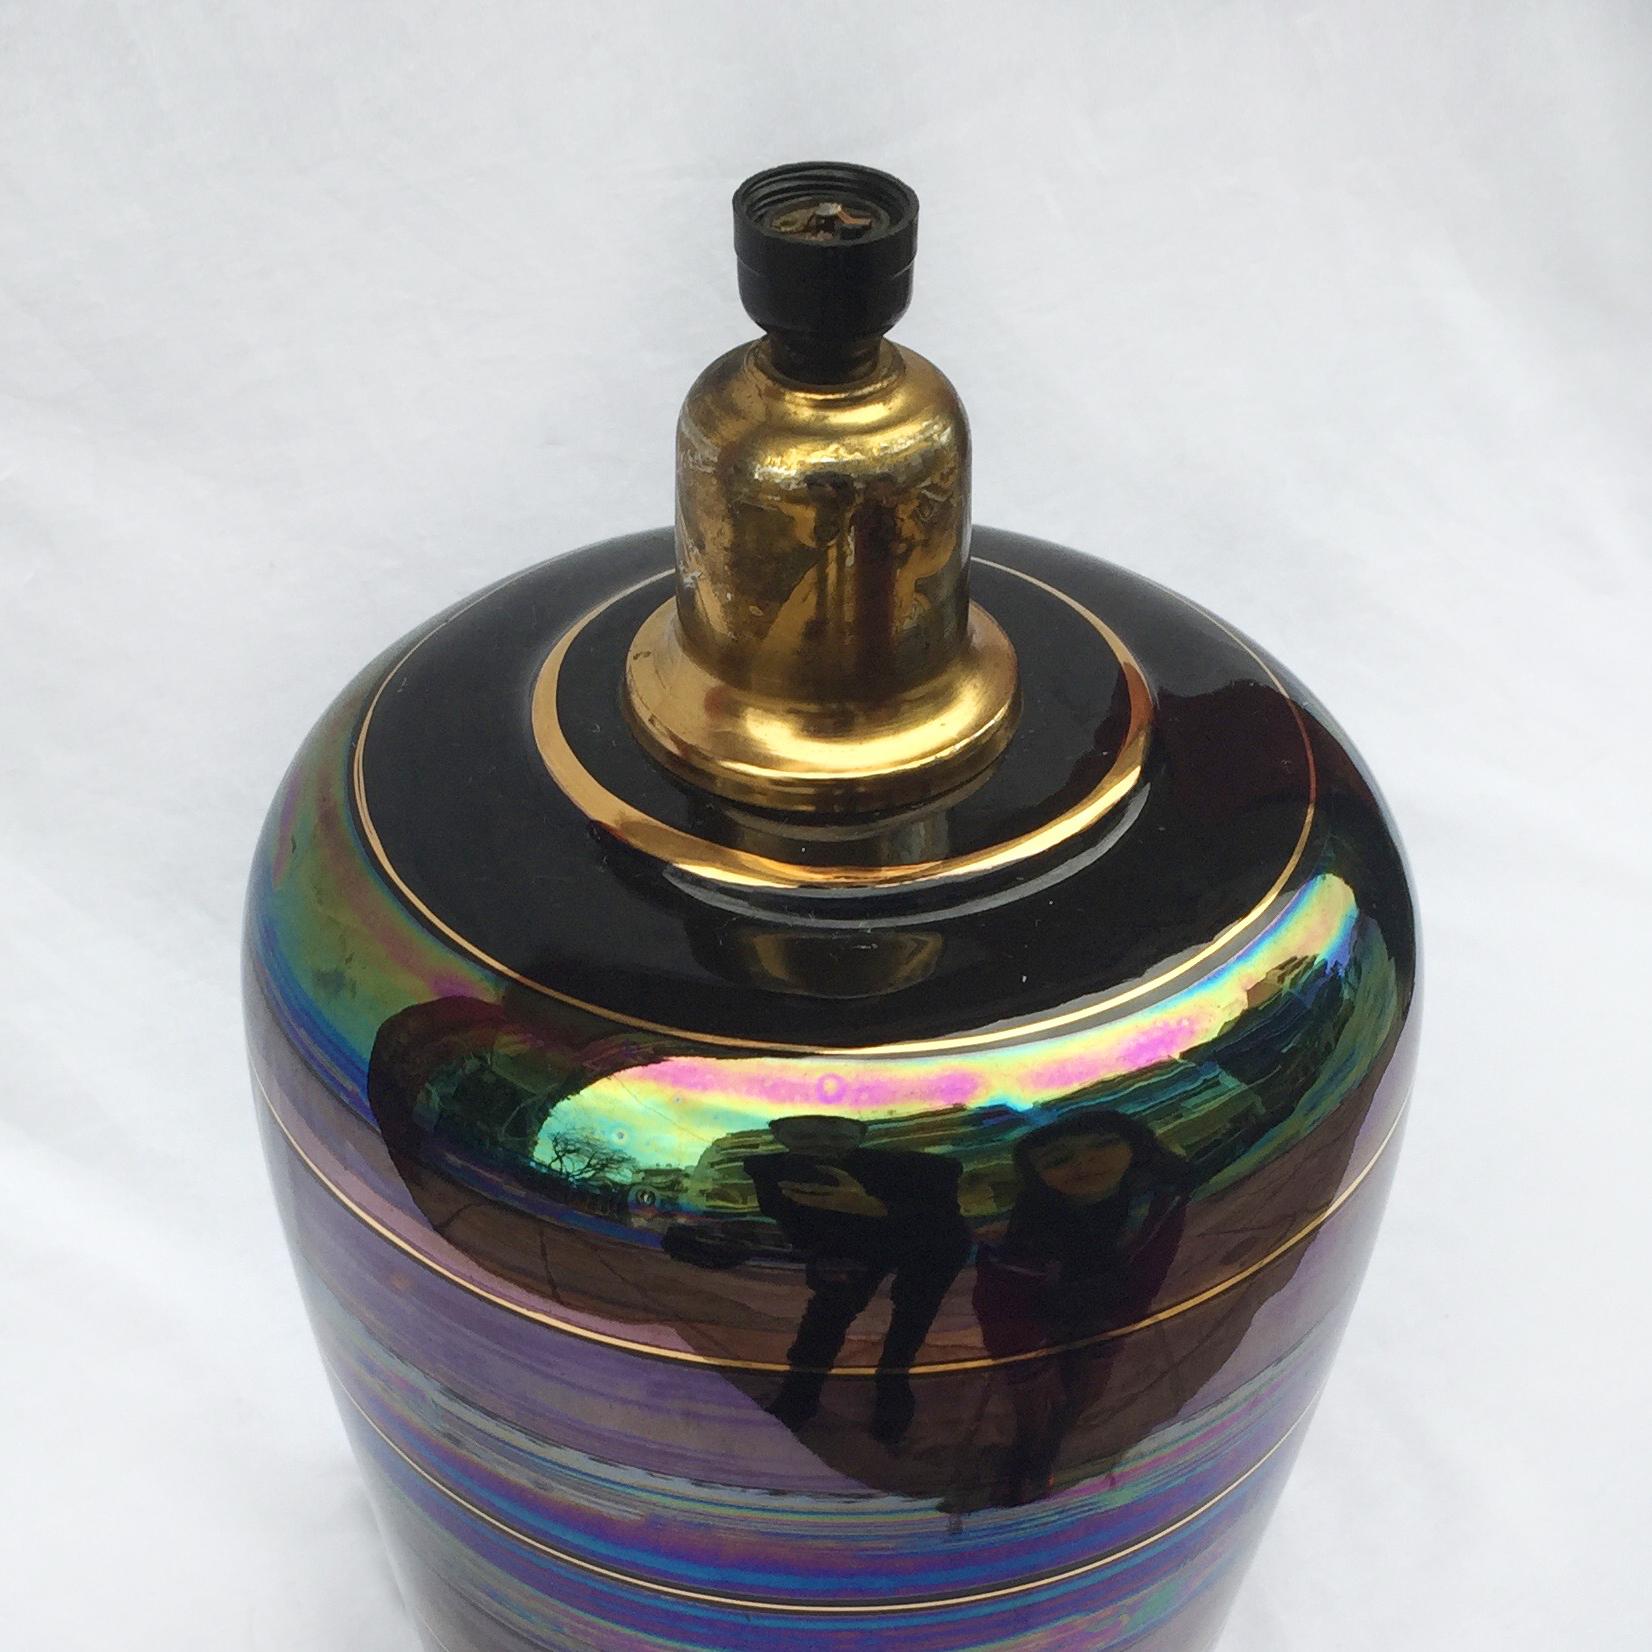 Iridescent Ceramic Table Lamp 1970s Art Nouveau Style Manner of Johann Loetz In Good Condition For Sale In London, GB